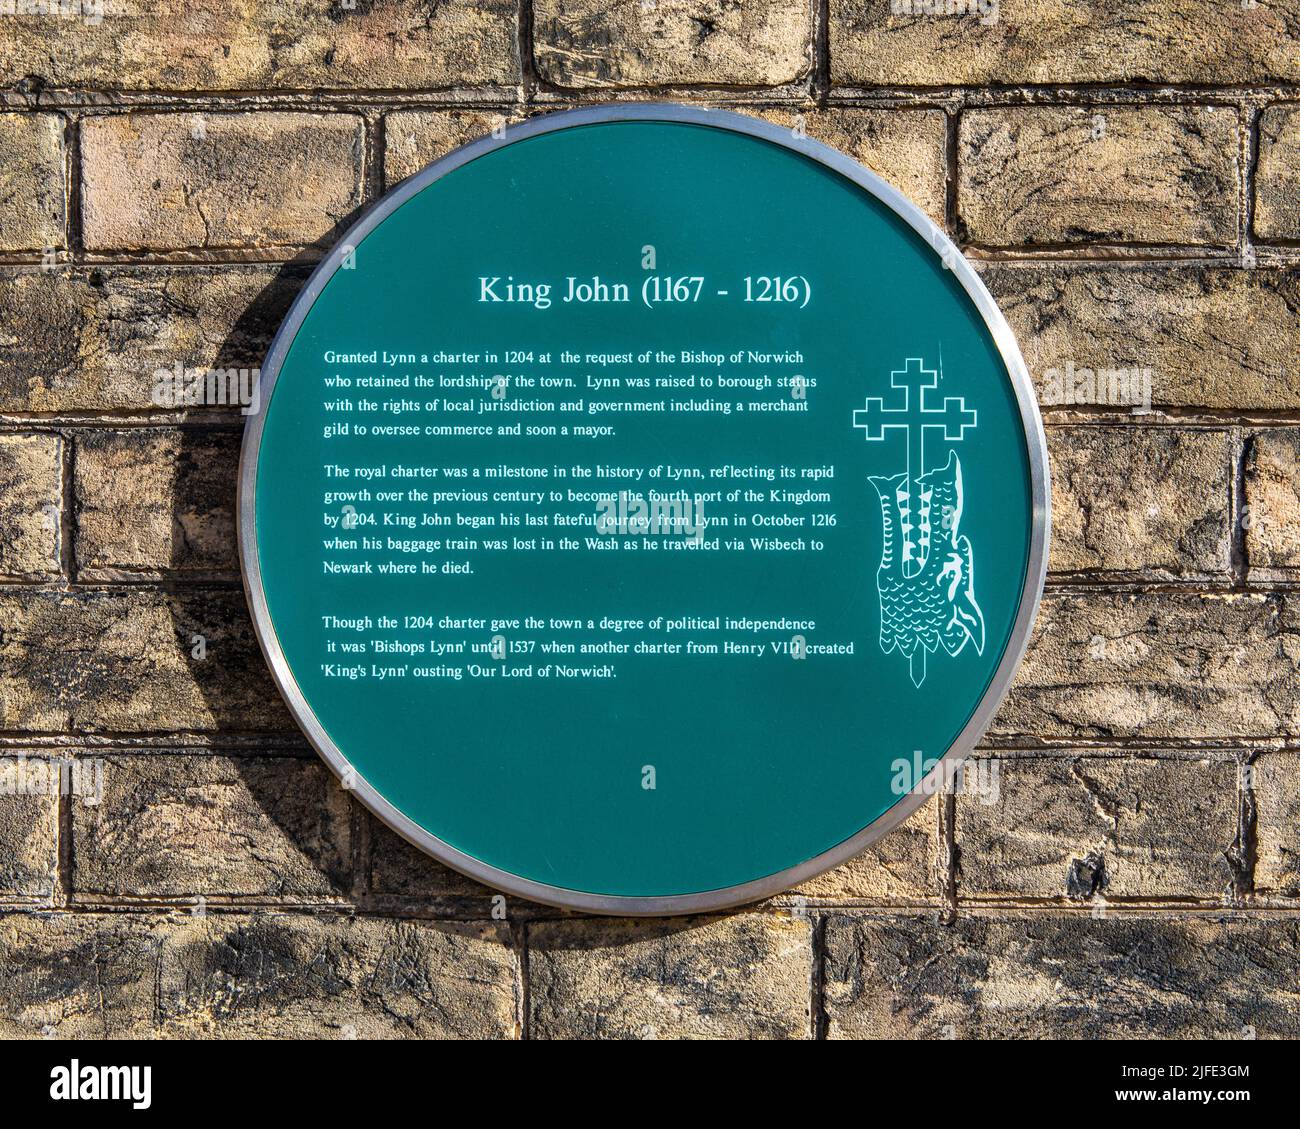 Norfolk, UK - April 7th 2022: A plaque located on the old Gaol House building in Kings Lynn in Norfolk, UK, detailing the history of King John and his Stock Photo